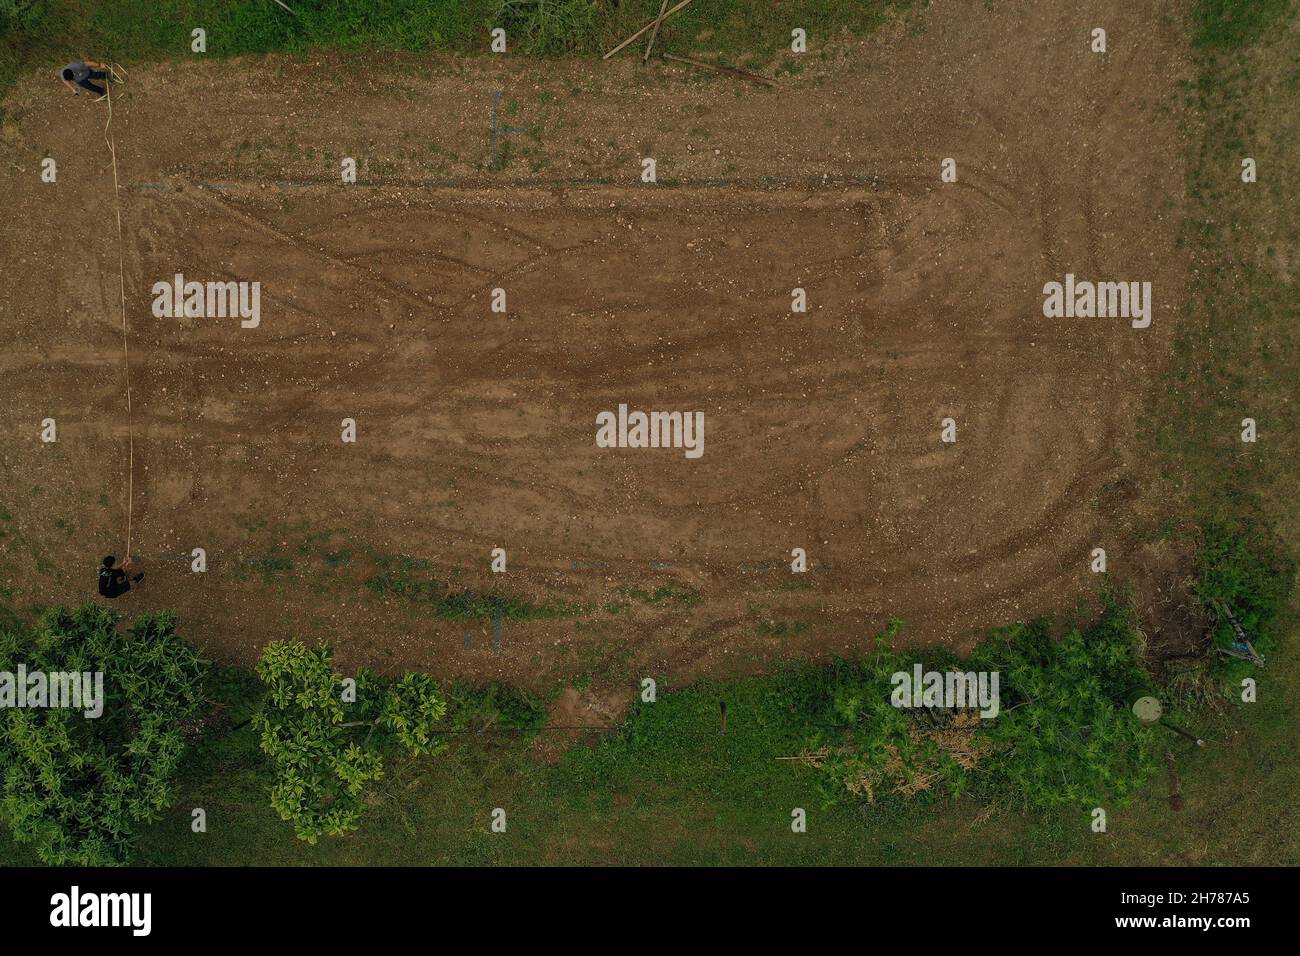 two people measure the width of the uncultivated agricultural field top down view of rural area with  uncultivated field, green and brown with bush an Stock Photo